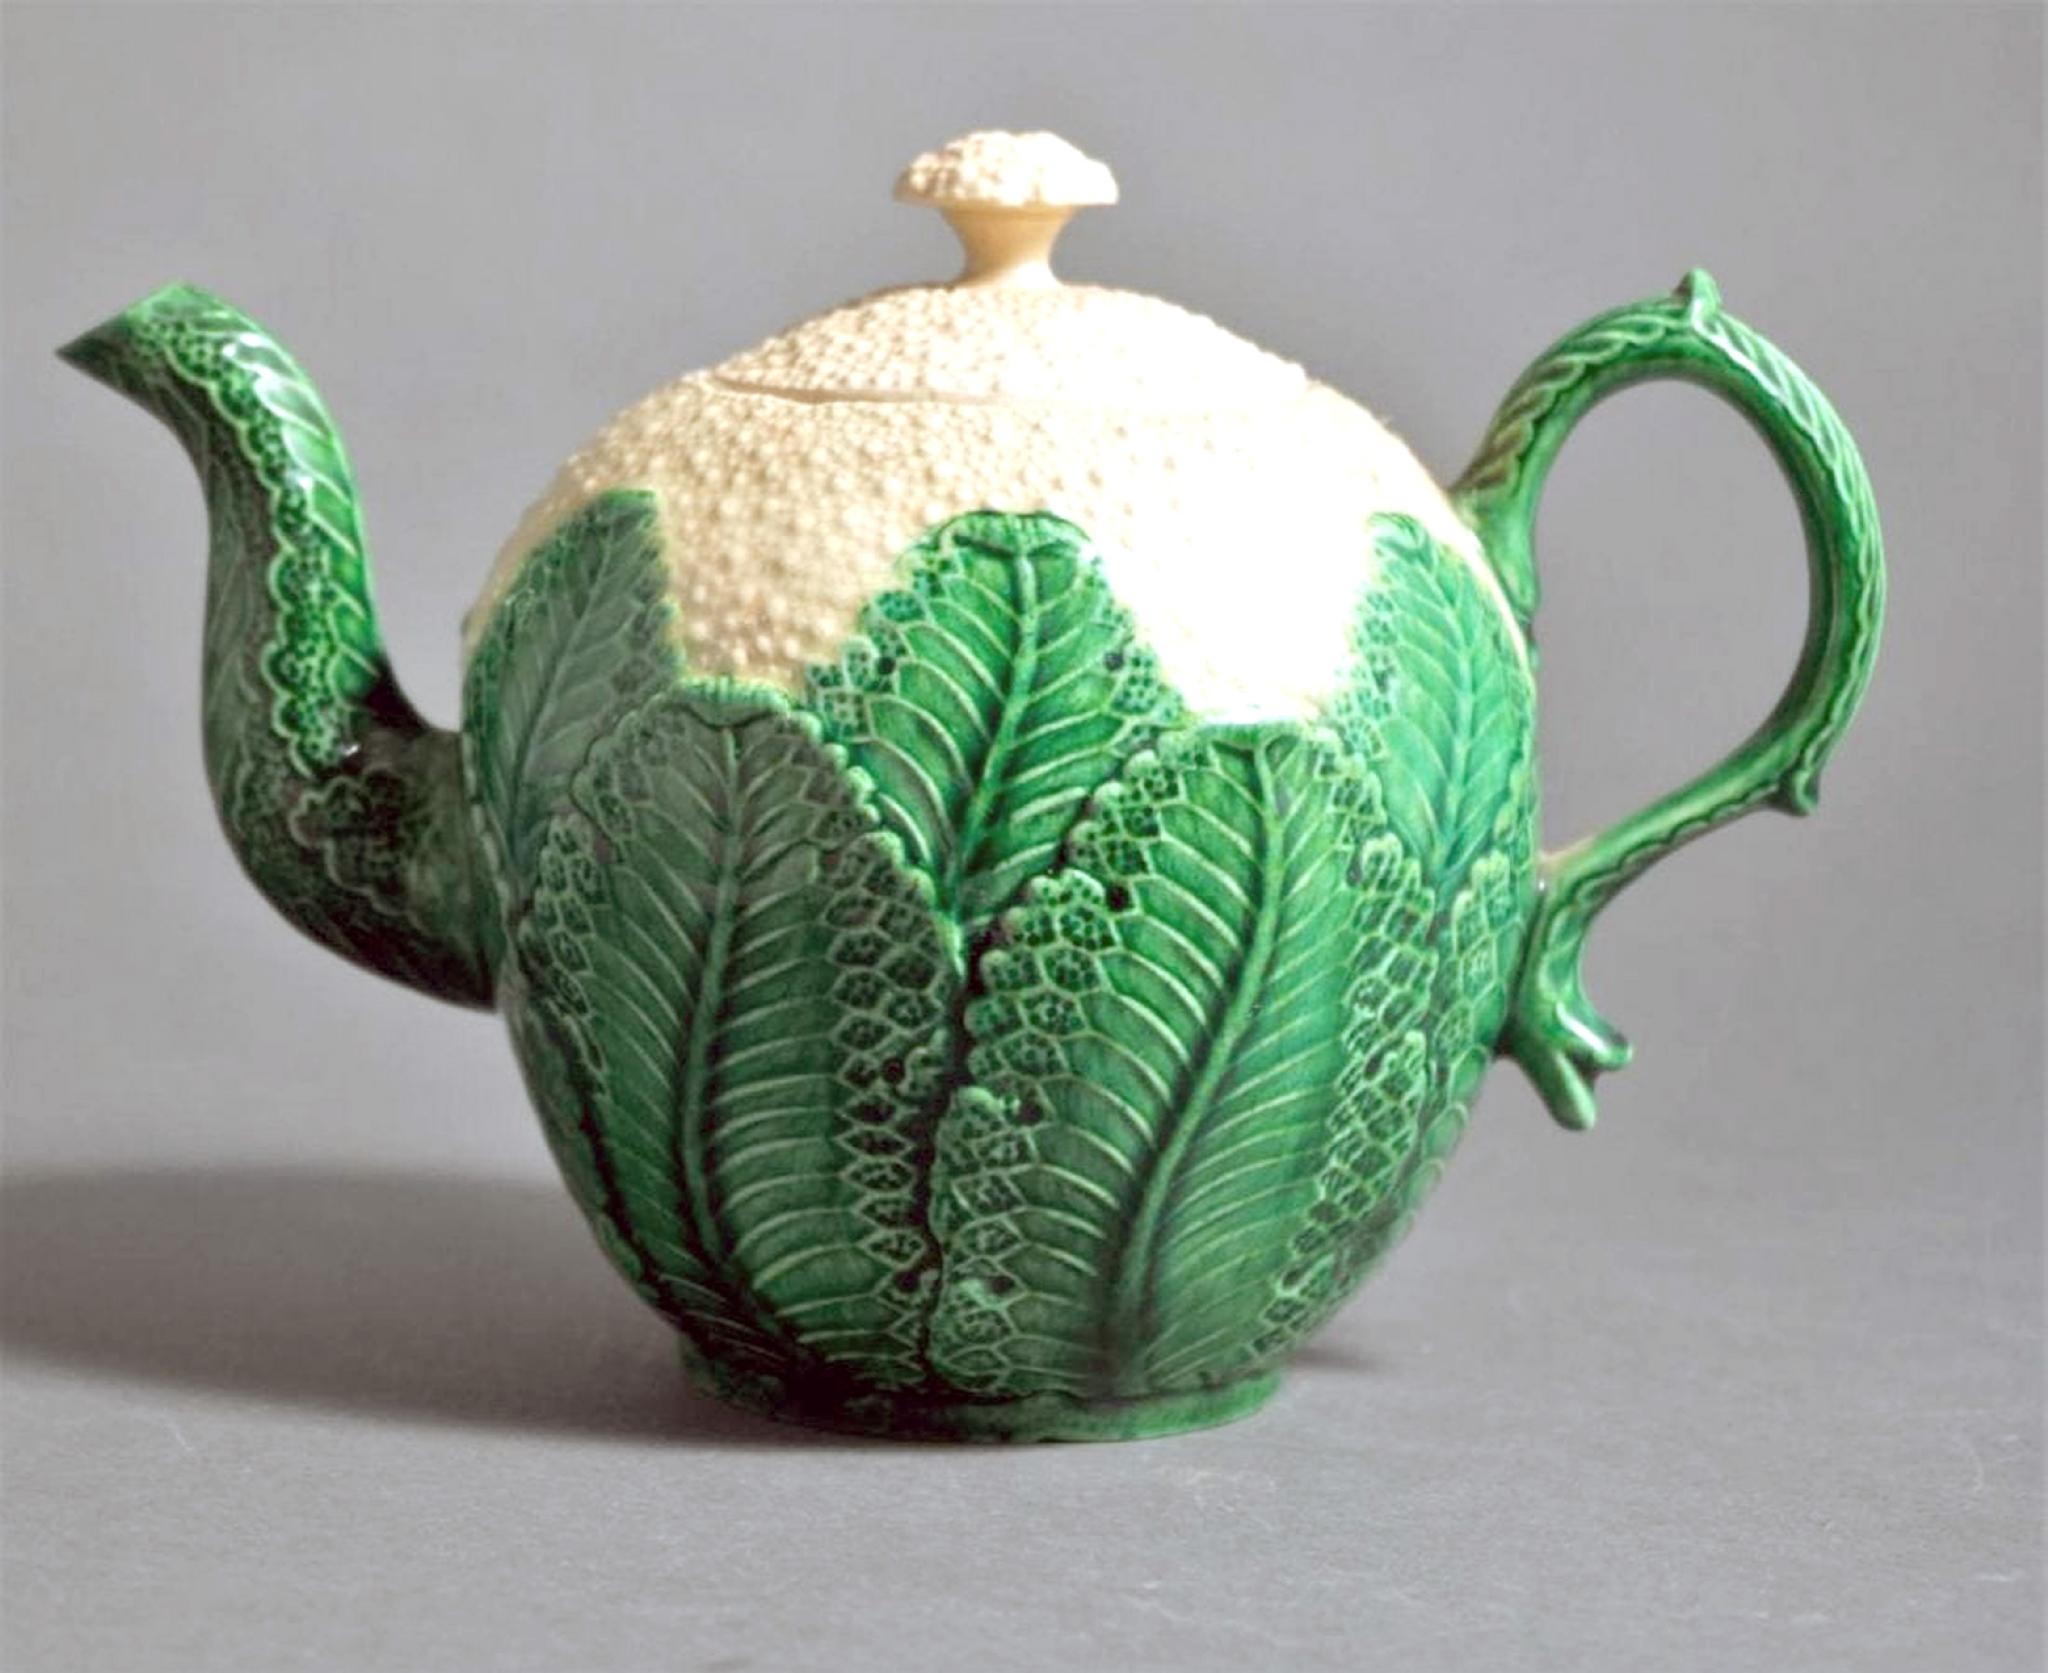 English green-glazed Creamware pottery cauliflower teapot and cover,
circa 1755-1775.

A creamware cauliflower teapot naturalistically molded as cauliflower florets above overlapping green-glazed leaves with molded spout and